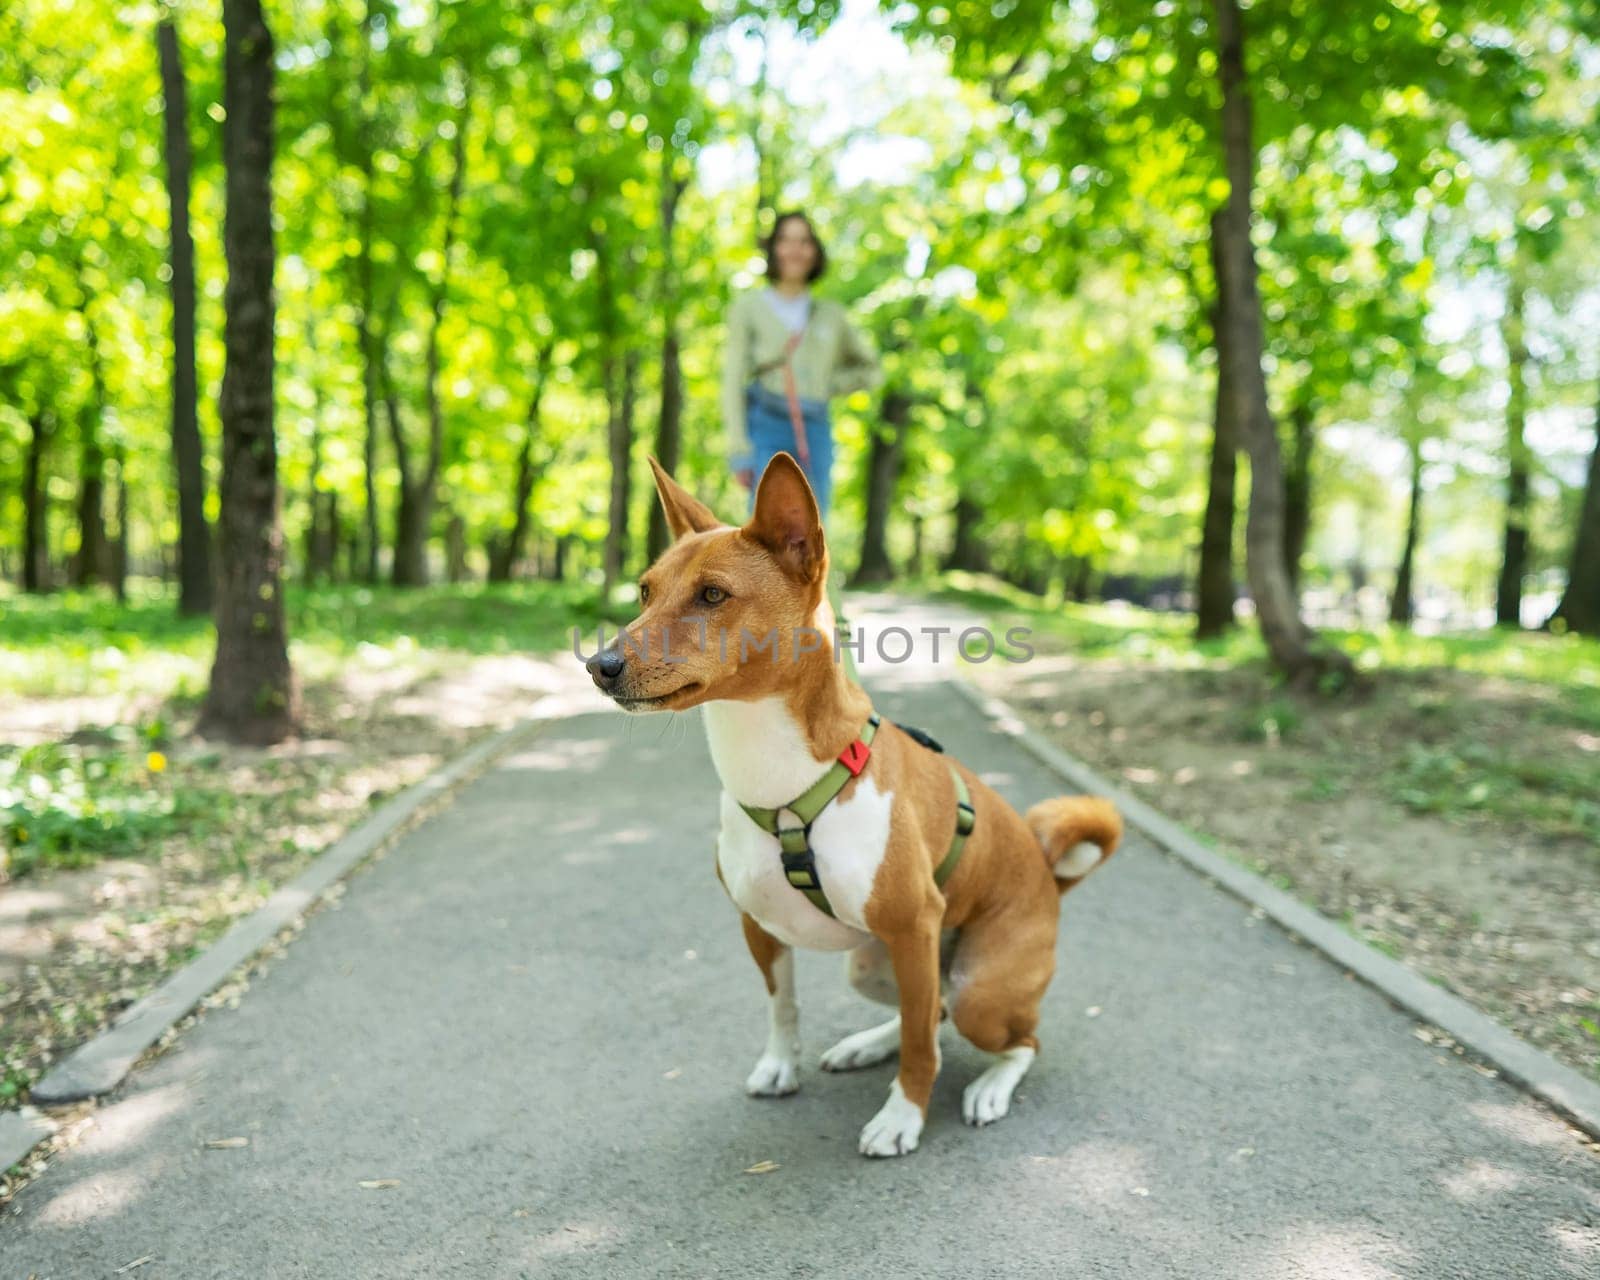 A young woman walks with an African basenji dog on a leash in the park